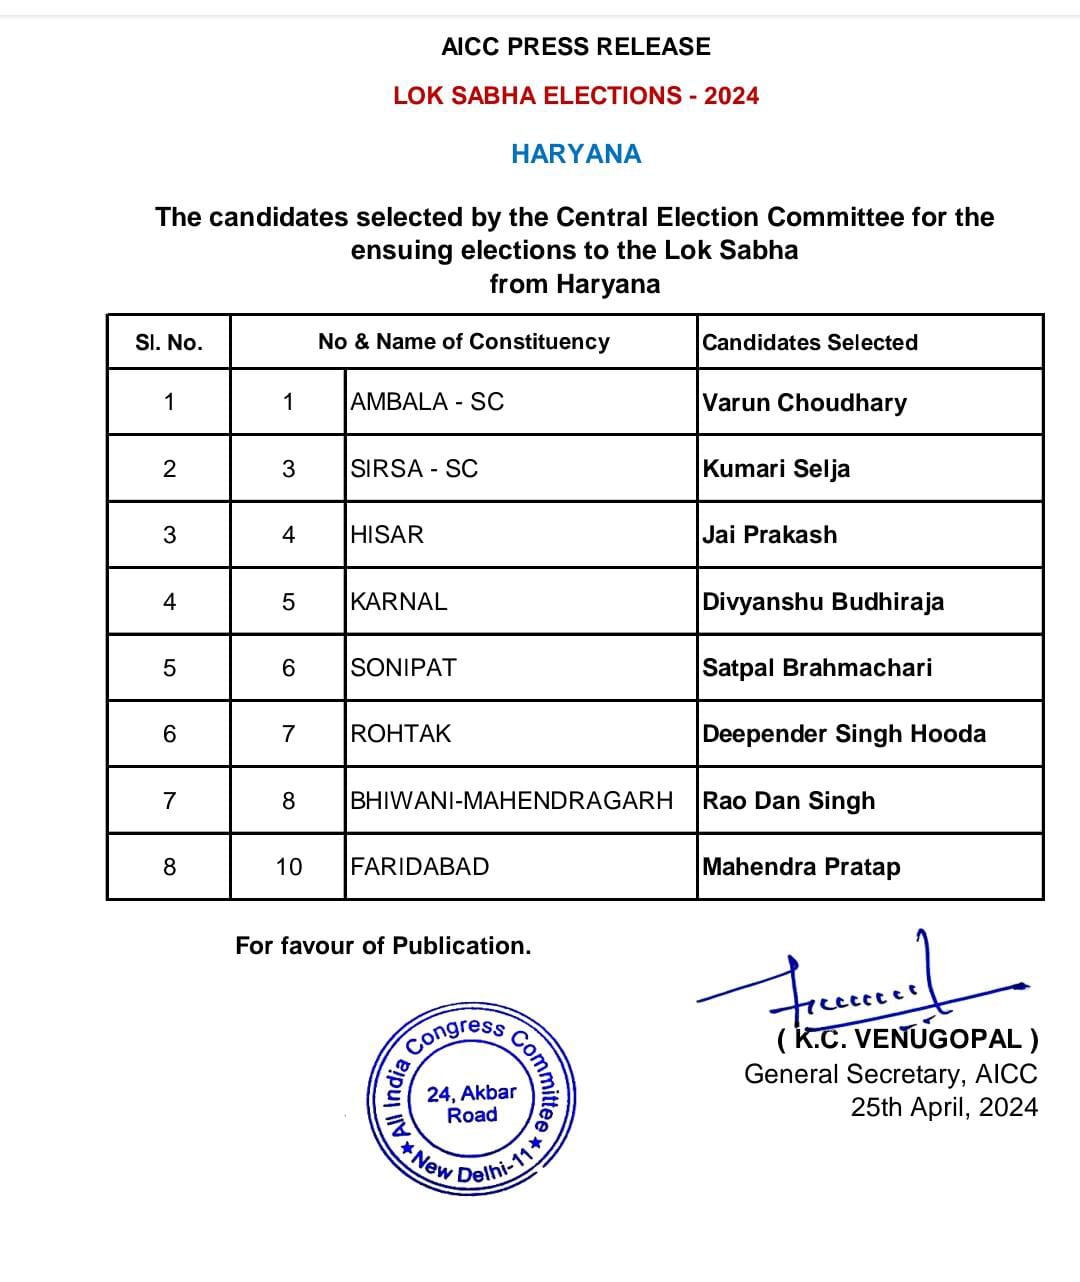 Haryana congress candidate list: Congress released the list of 8 candidates, shocking names on 3 seats, even Brijendra did not get the ticket.